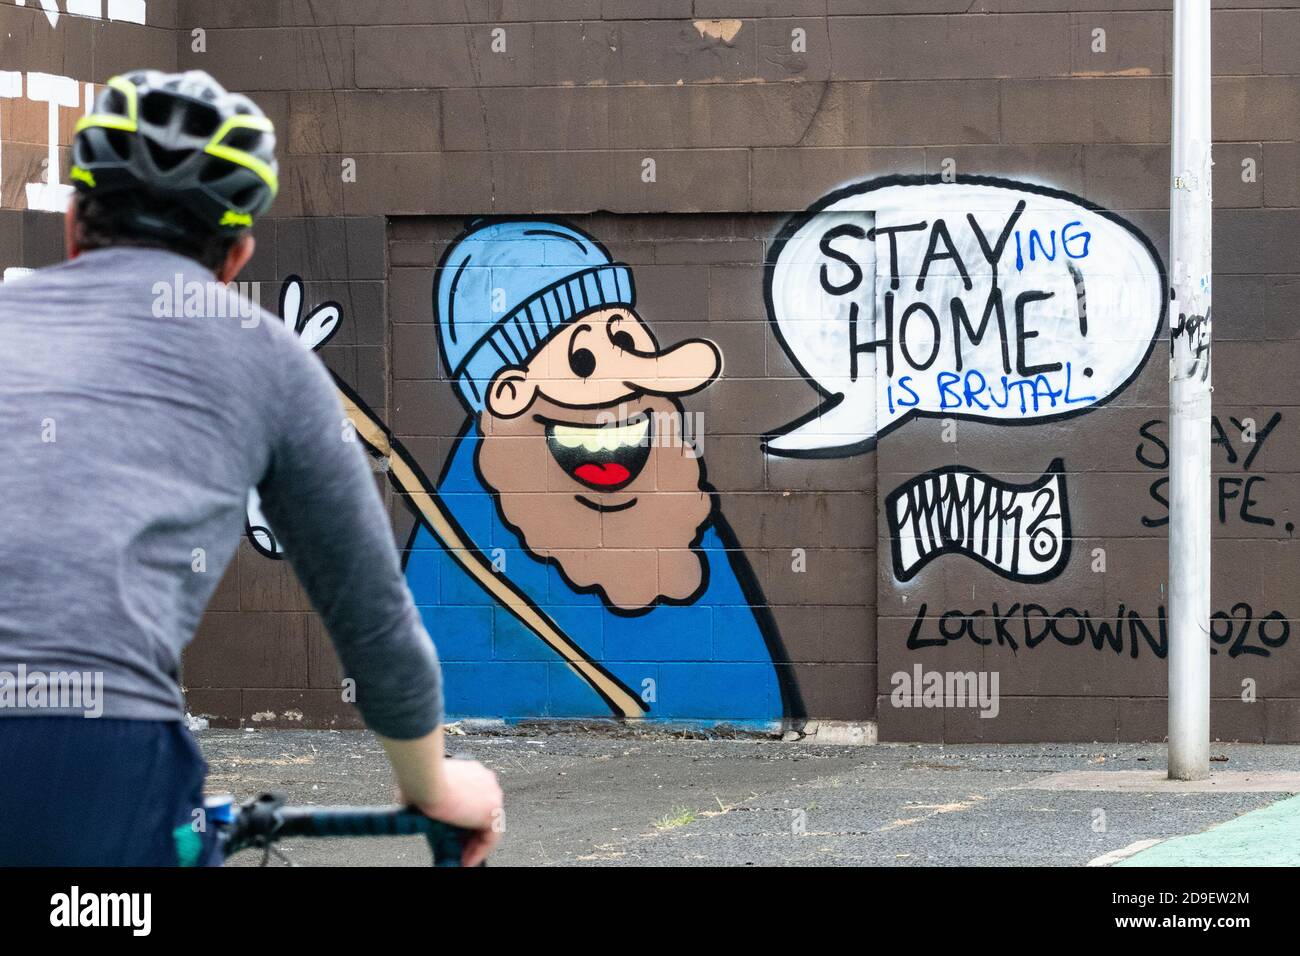 Mental health during lockdown - Stay Home coronavirus graffiti in Glasgow altered to read 'Staying at home is brutal' Glasgow, Scotland, UK June 2020 Stock Photo